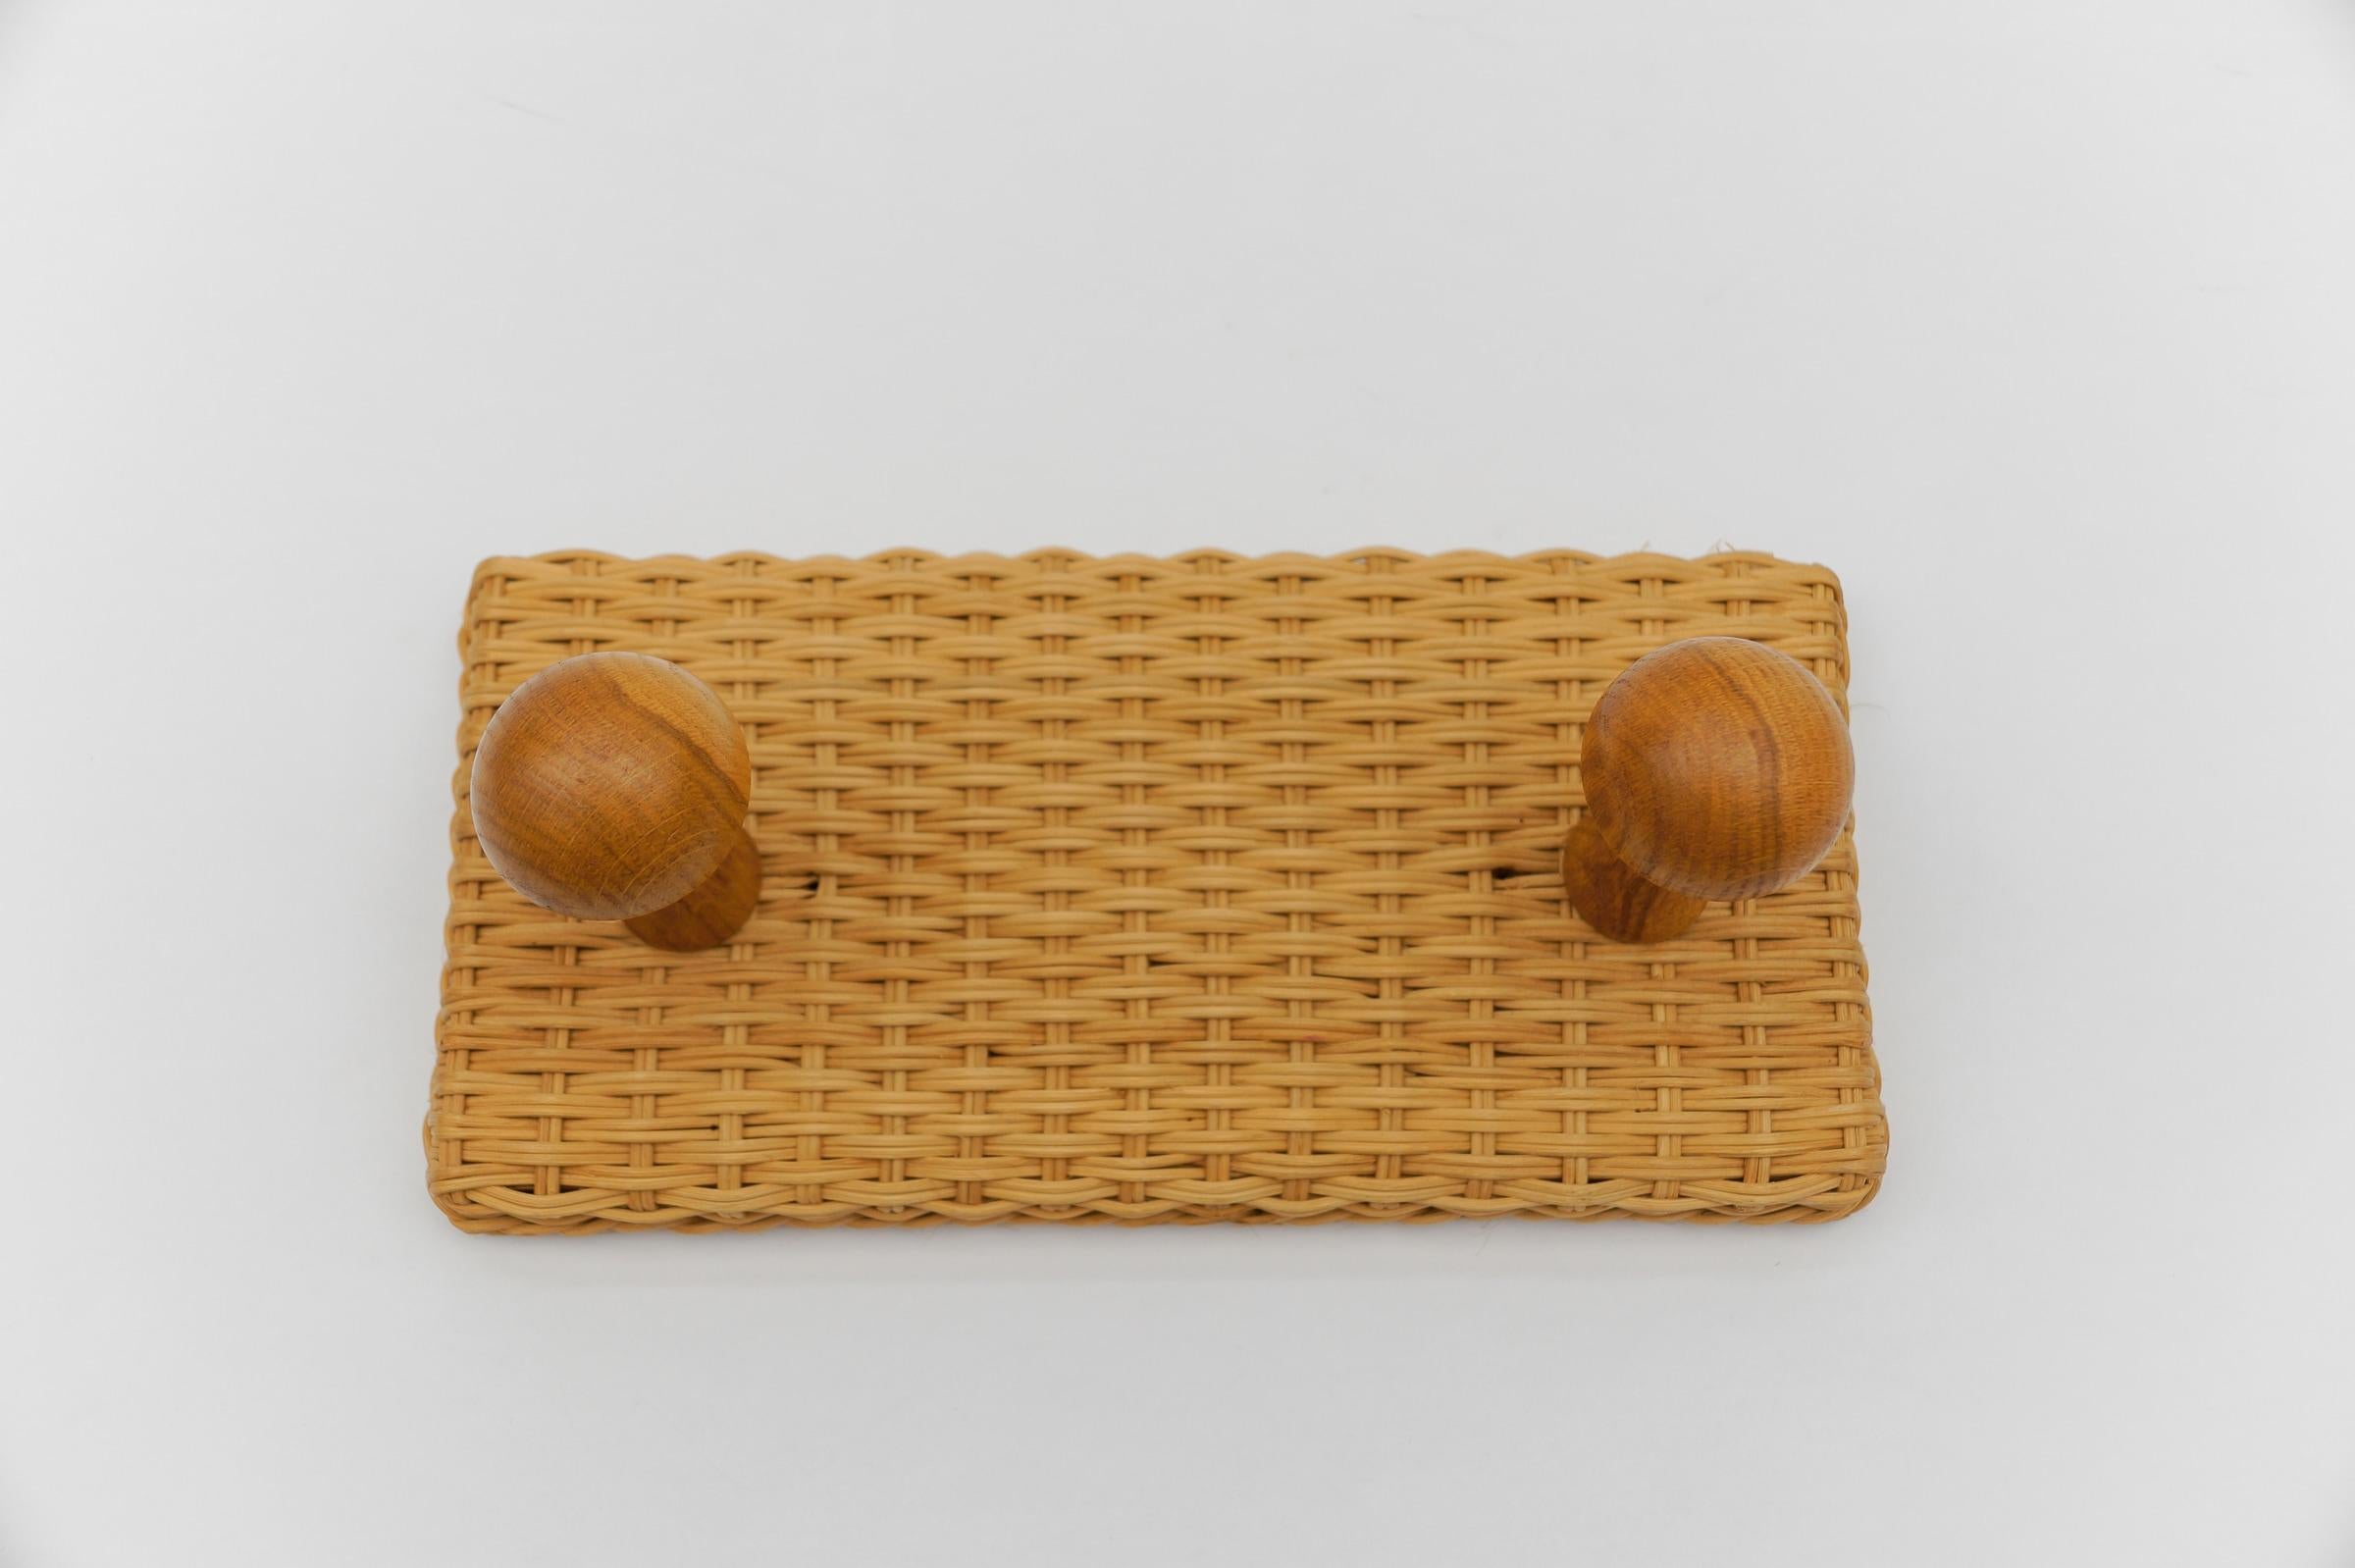 Pair of Double Scandinavian Wall Mounted Coat Hooks in Rattan and Wood, 1960s For Sale 3